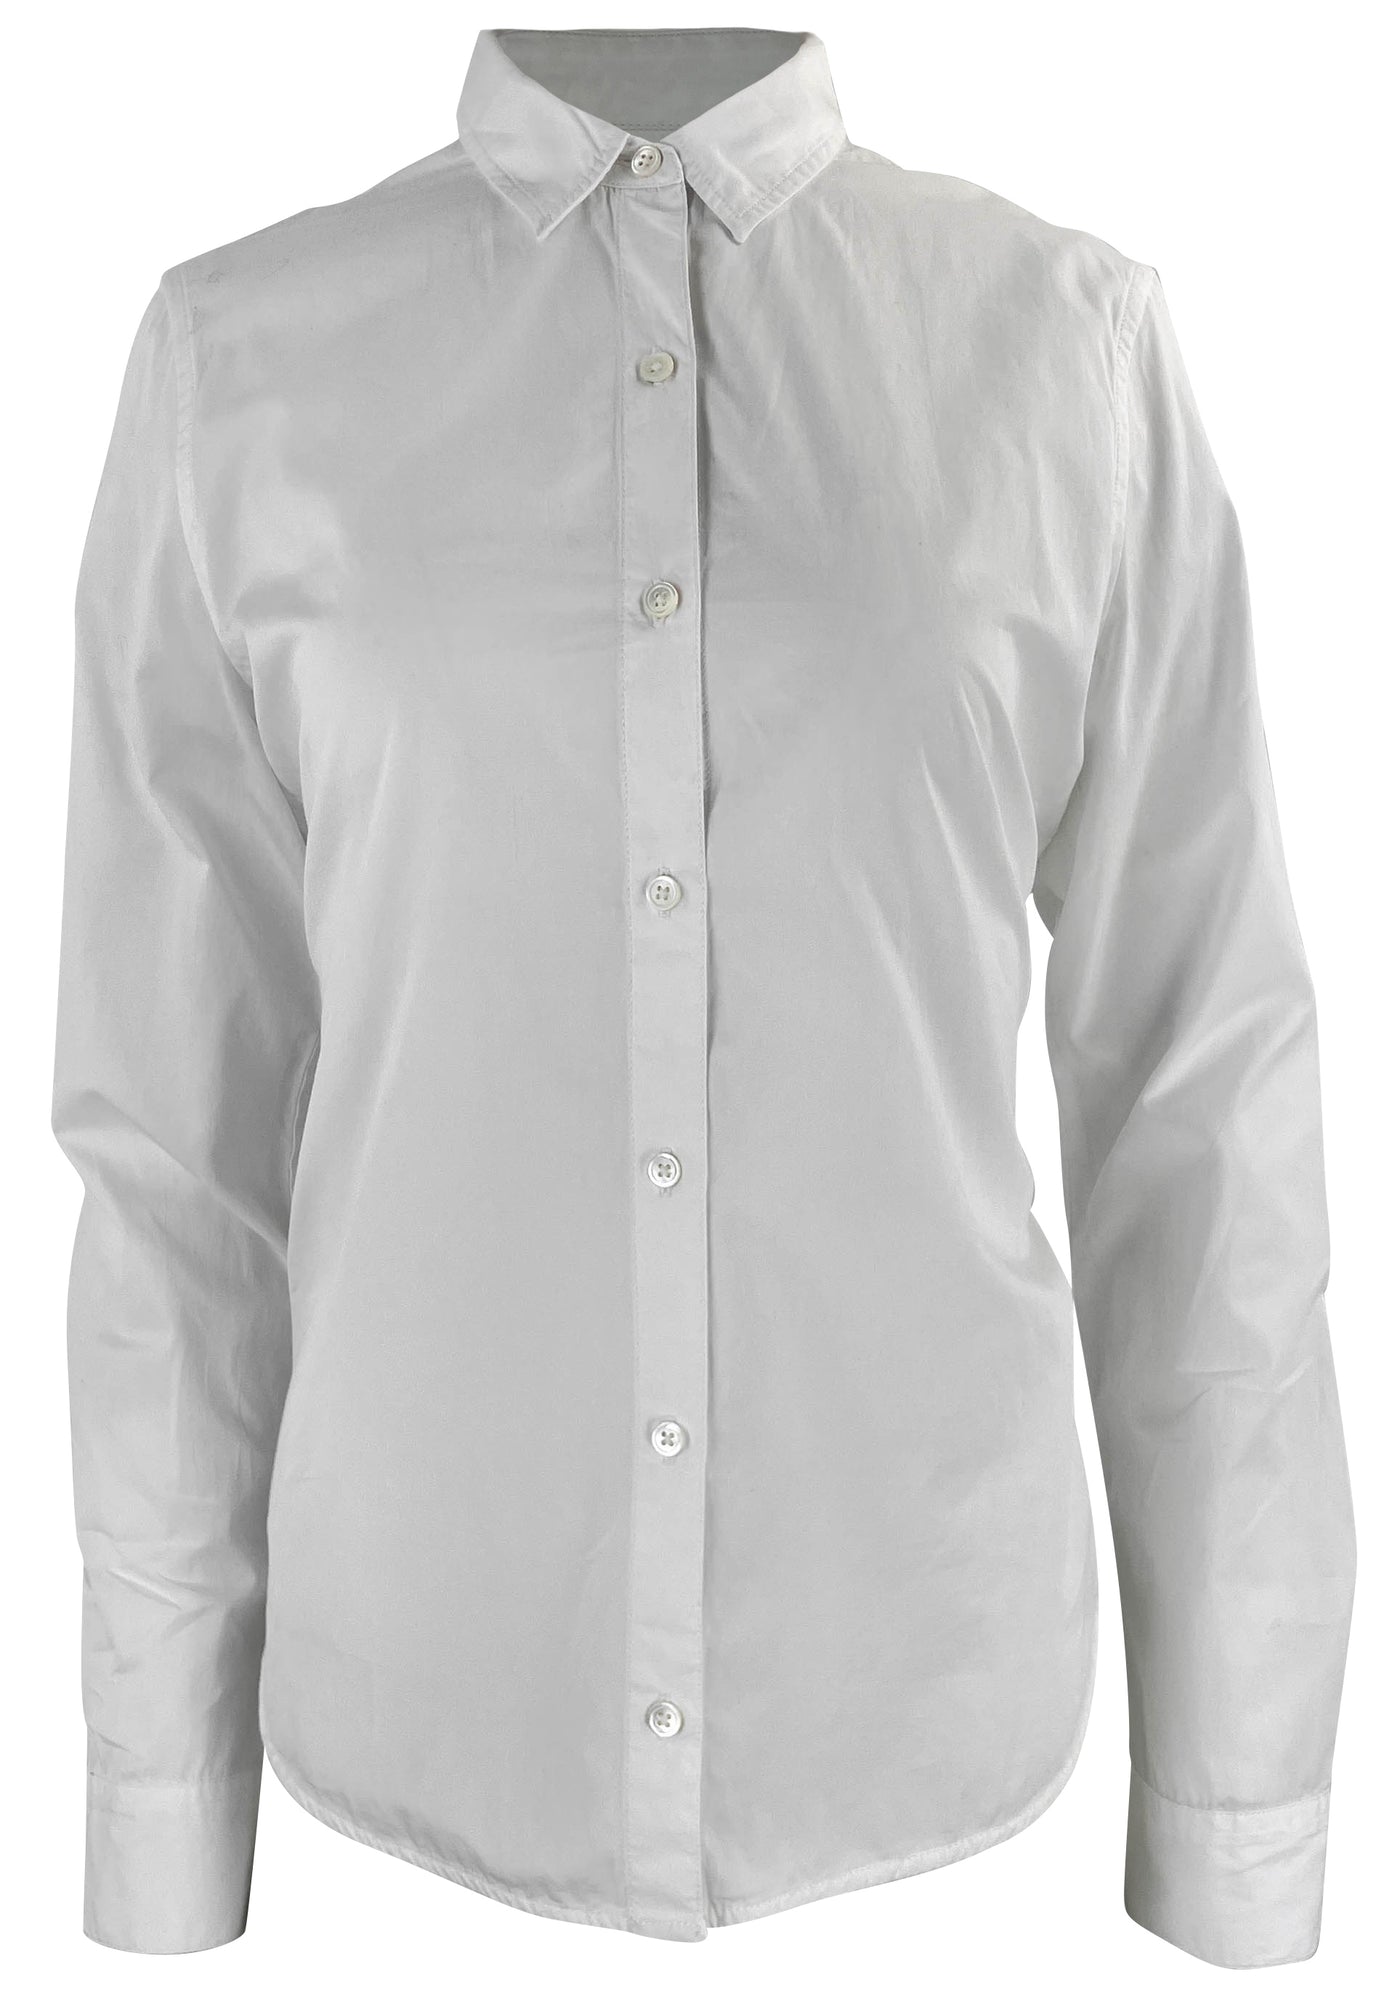 ATM Button Down in White - Discounts on ATM at UAL